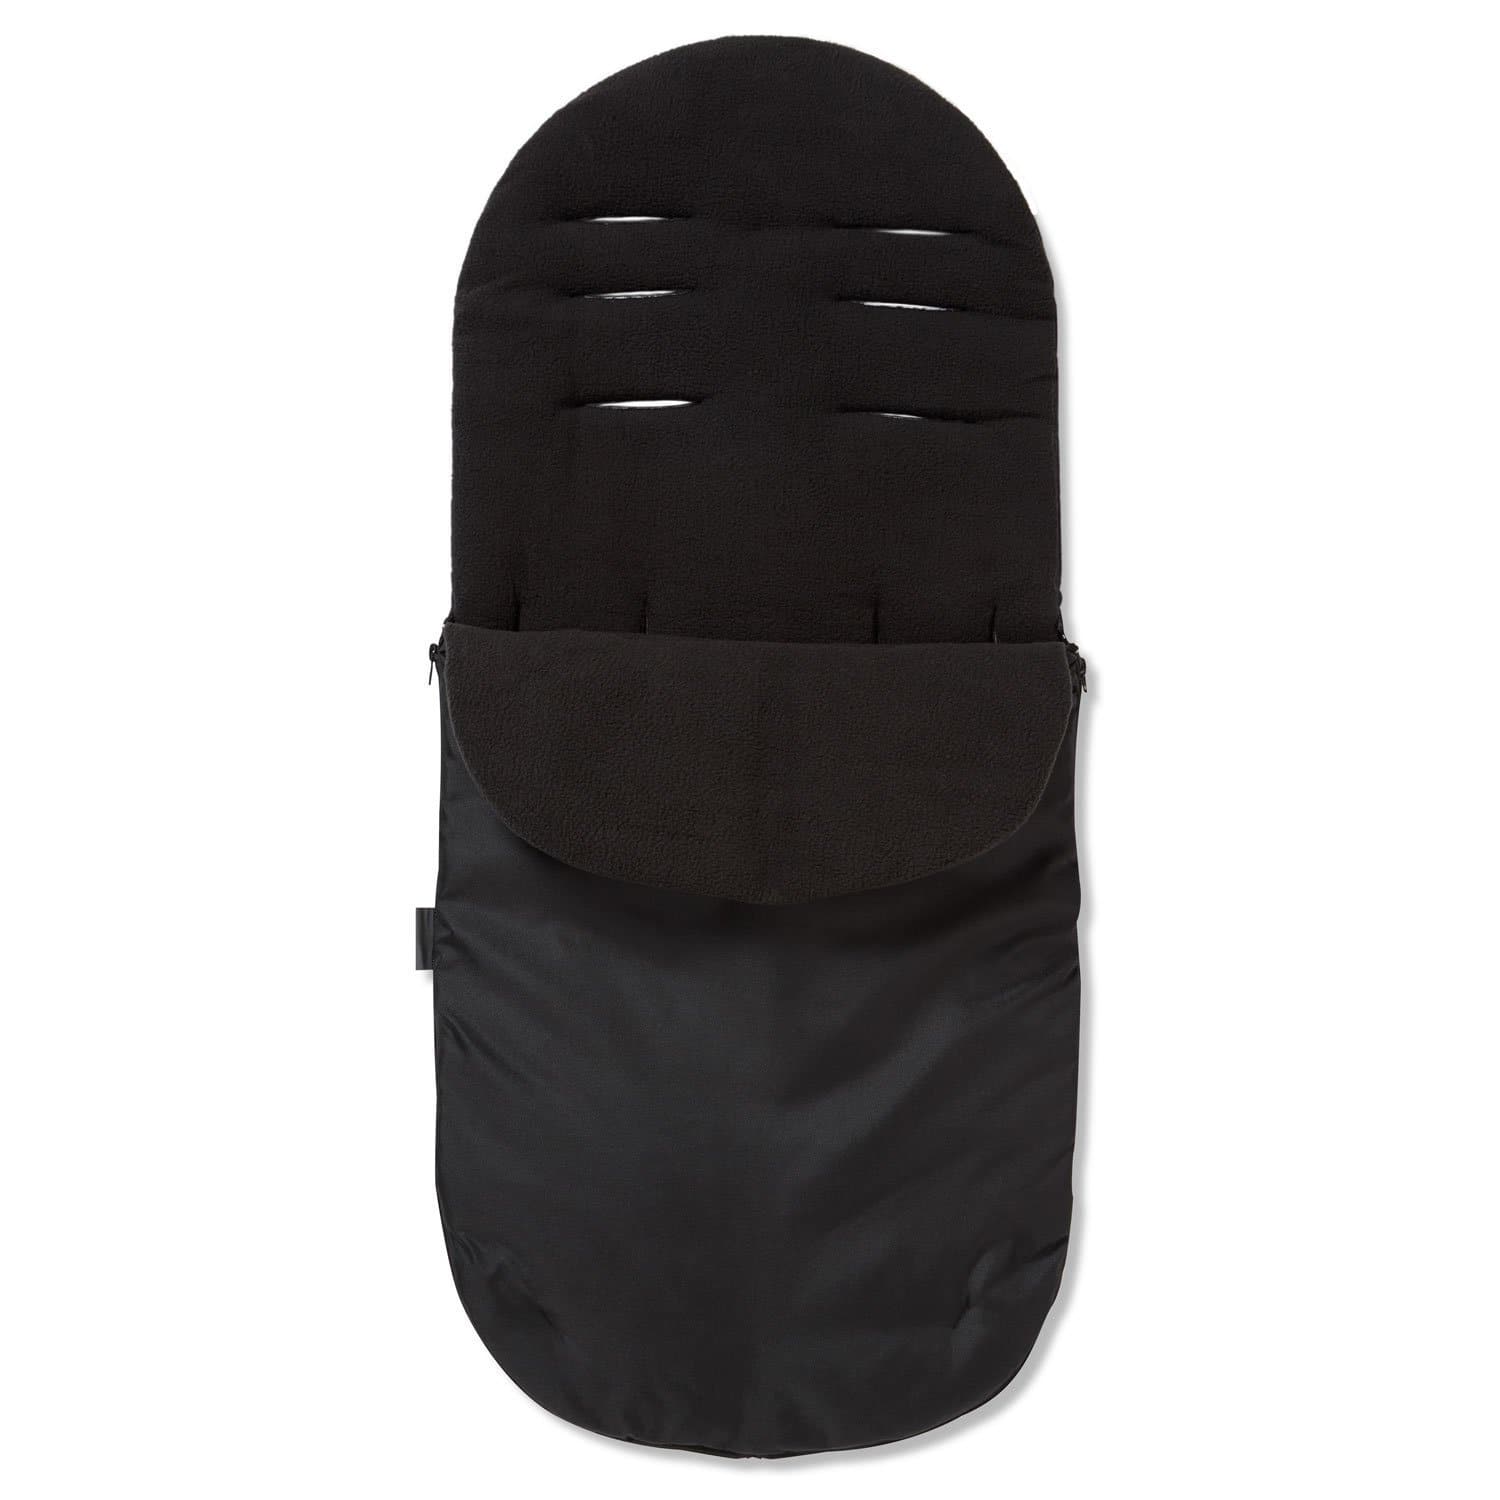 Footmuff / Cosy Toes Compatible with Phil & Teds - Black / Fits All Models | For Your Little One